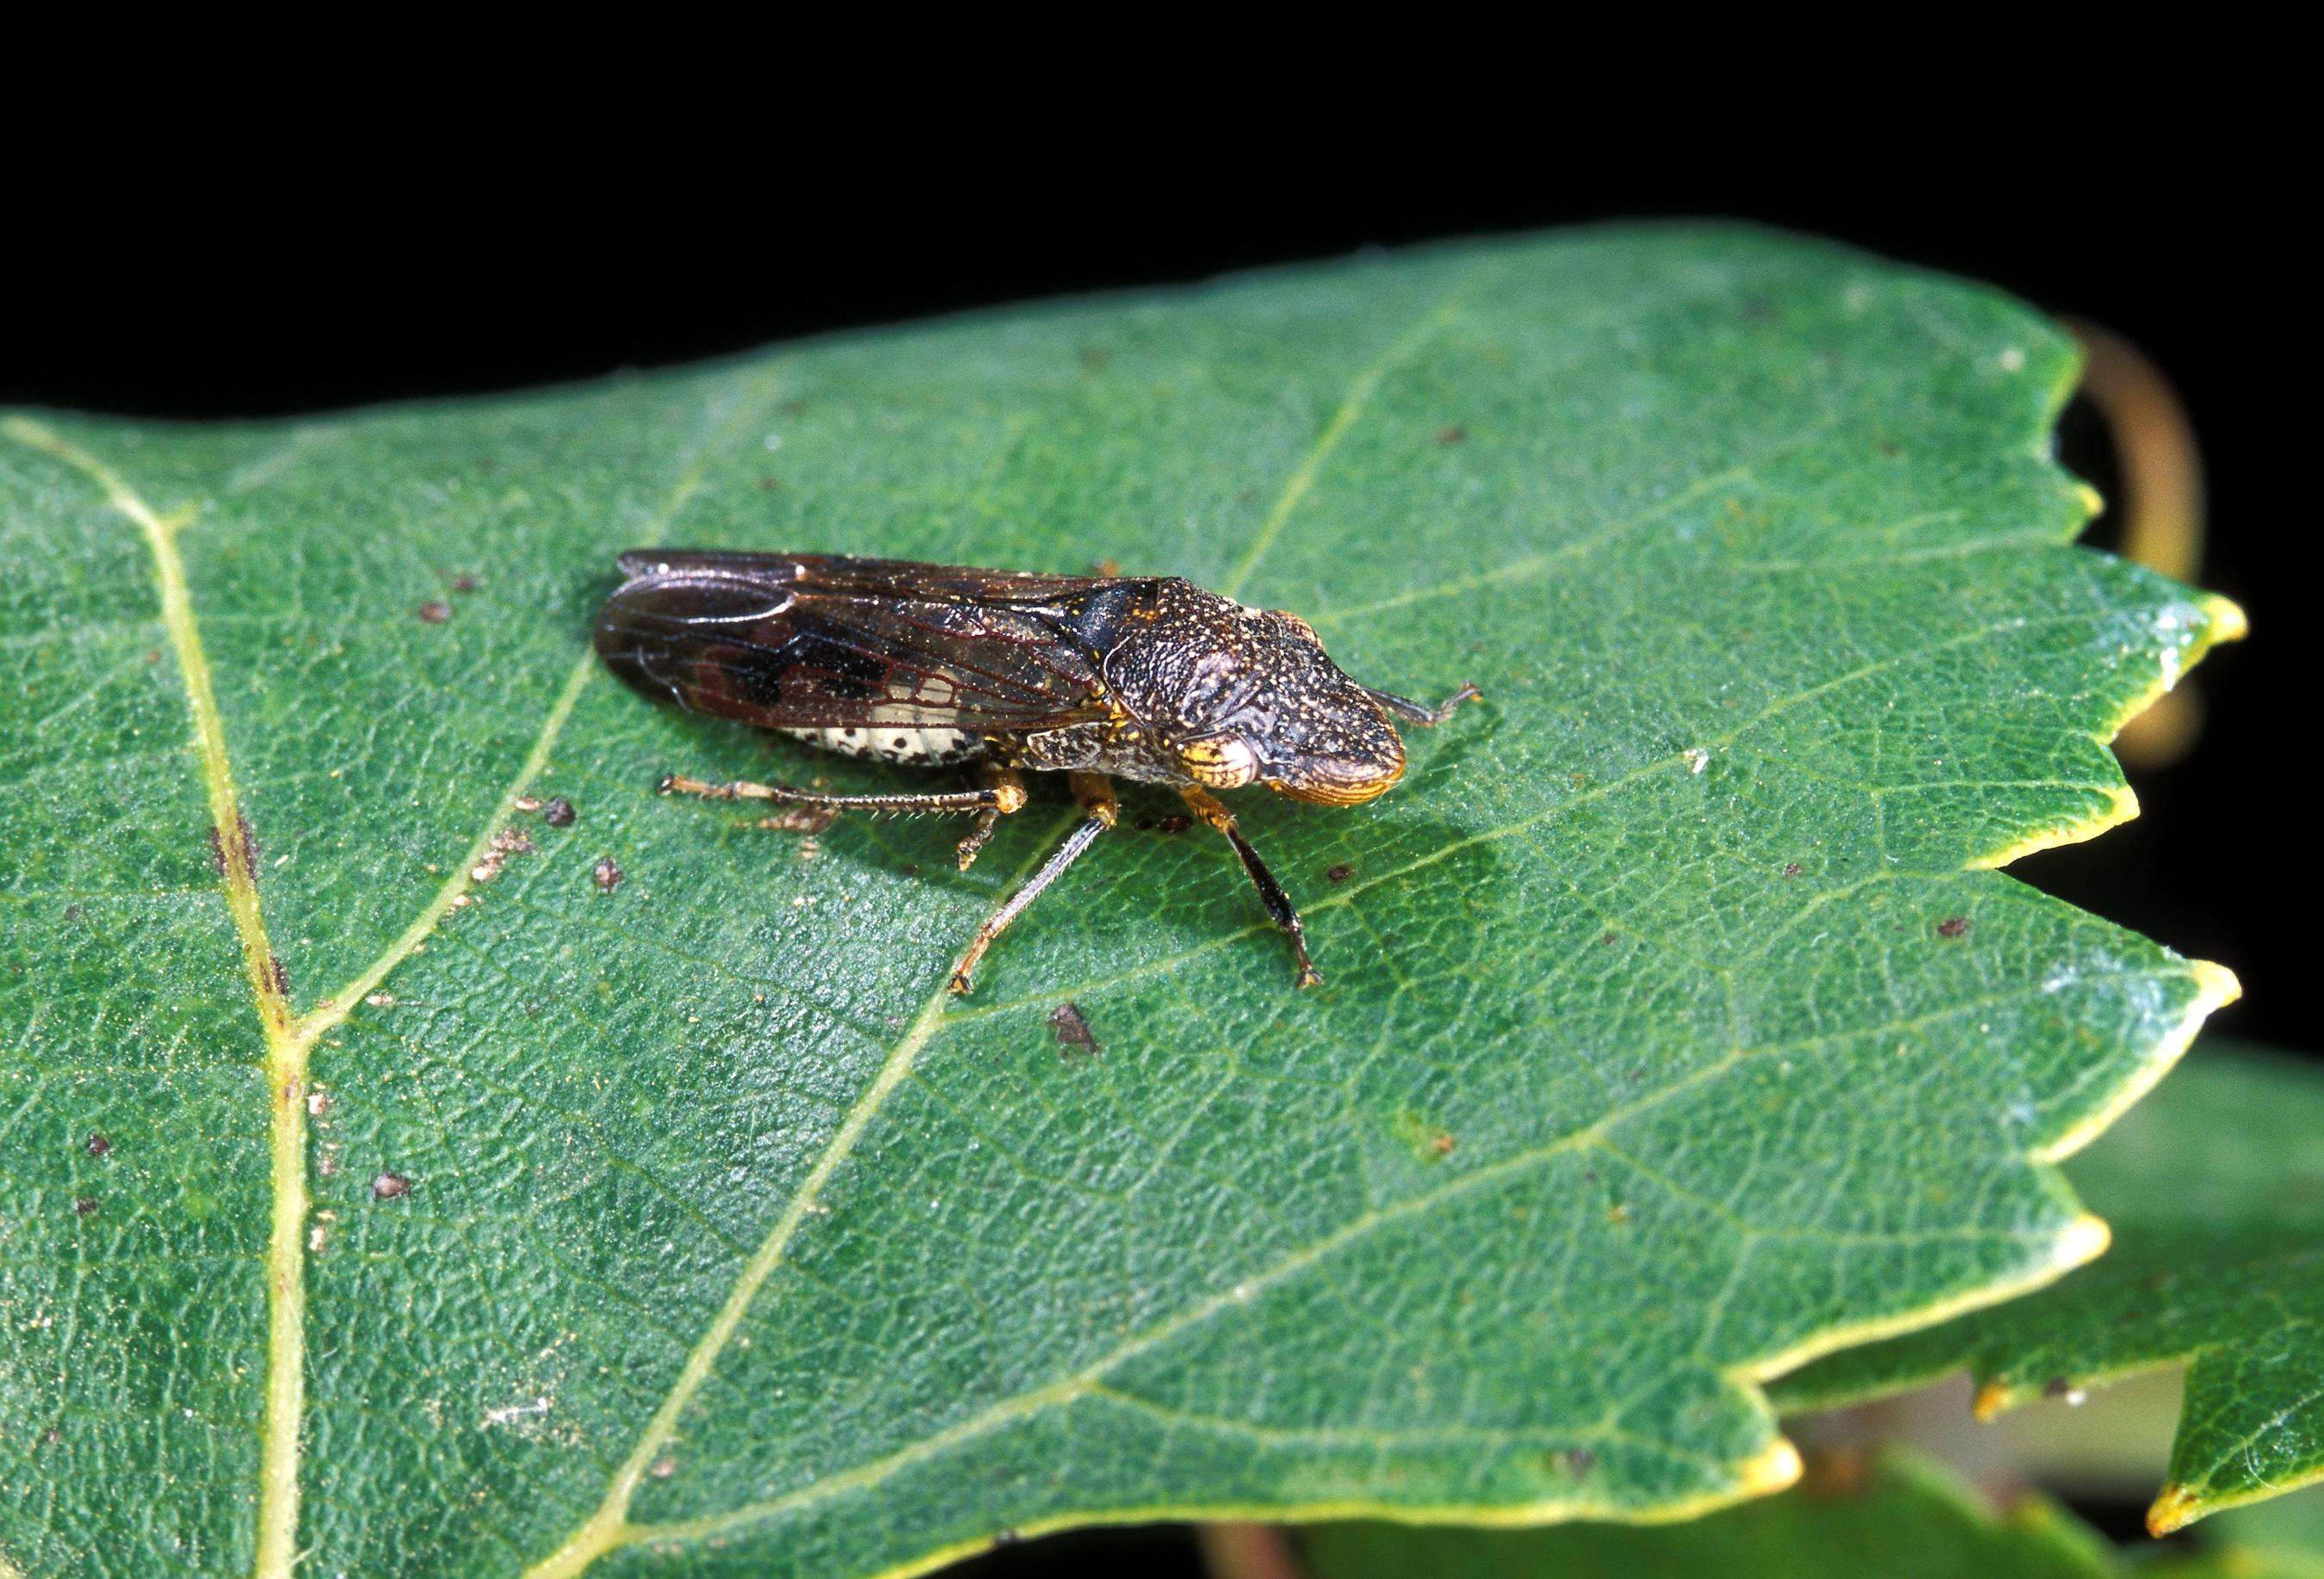 Dark brown winged insect approximately 1⁄2 inch long with whitish to yellow spots on its head. 